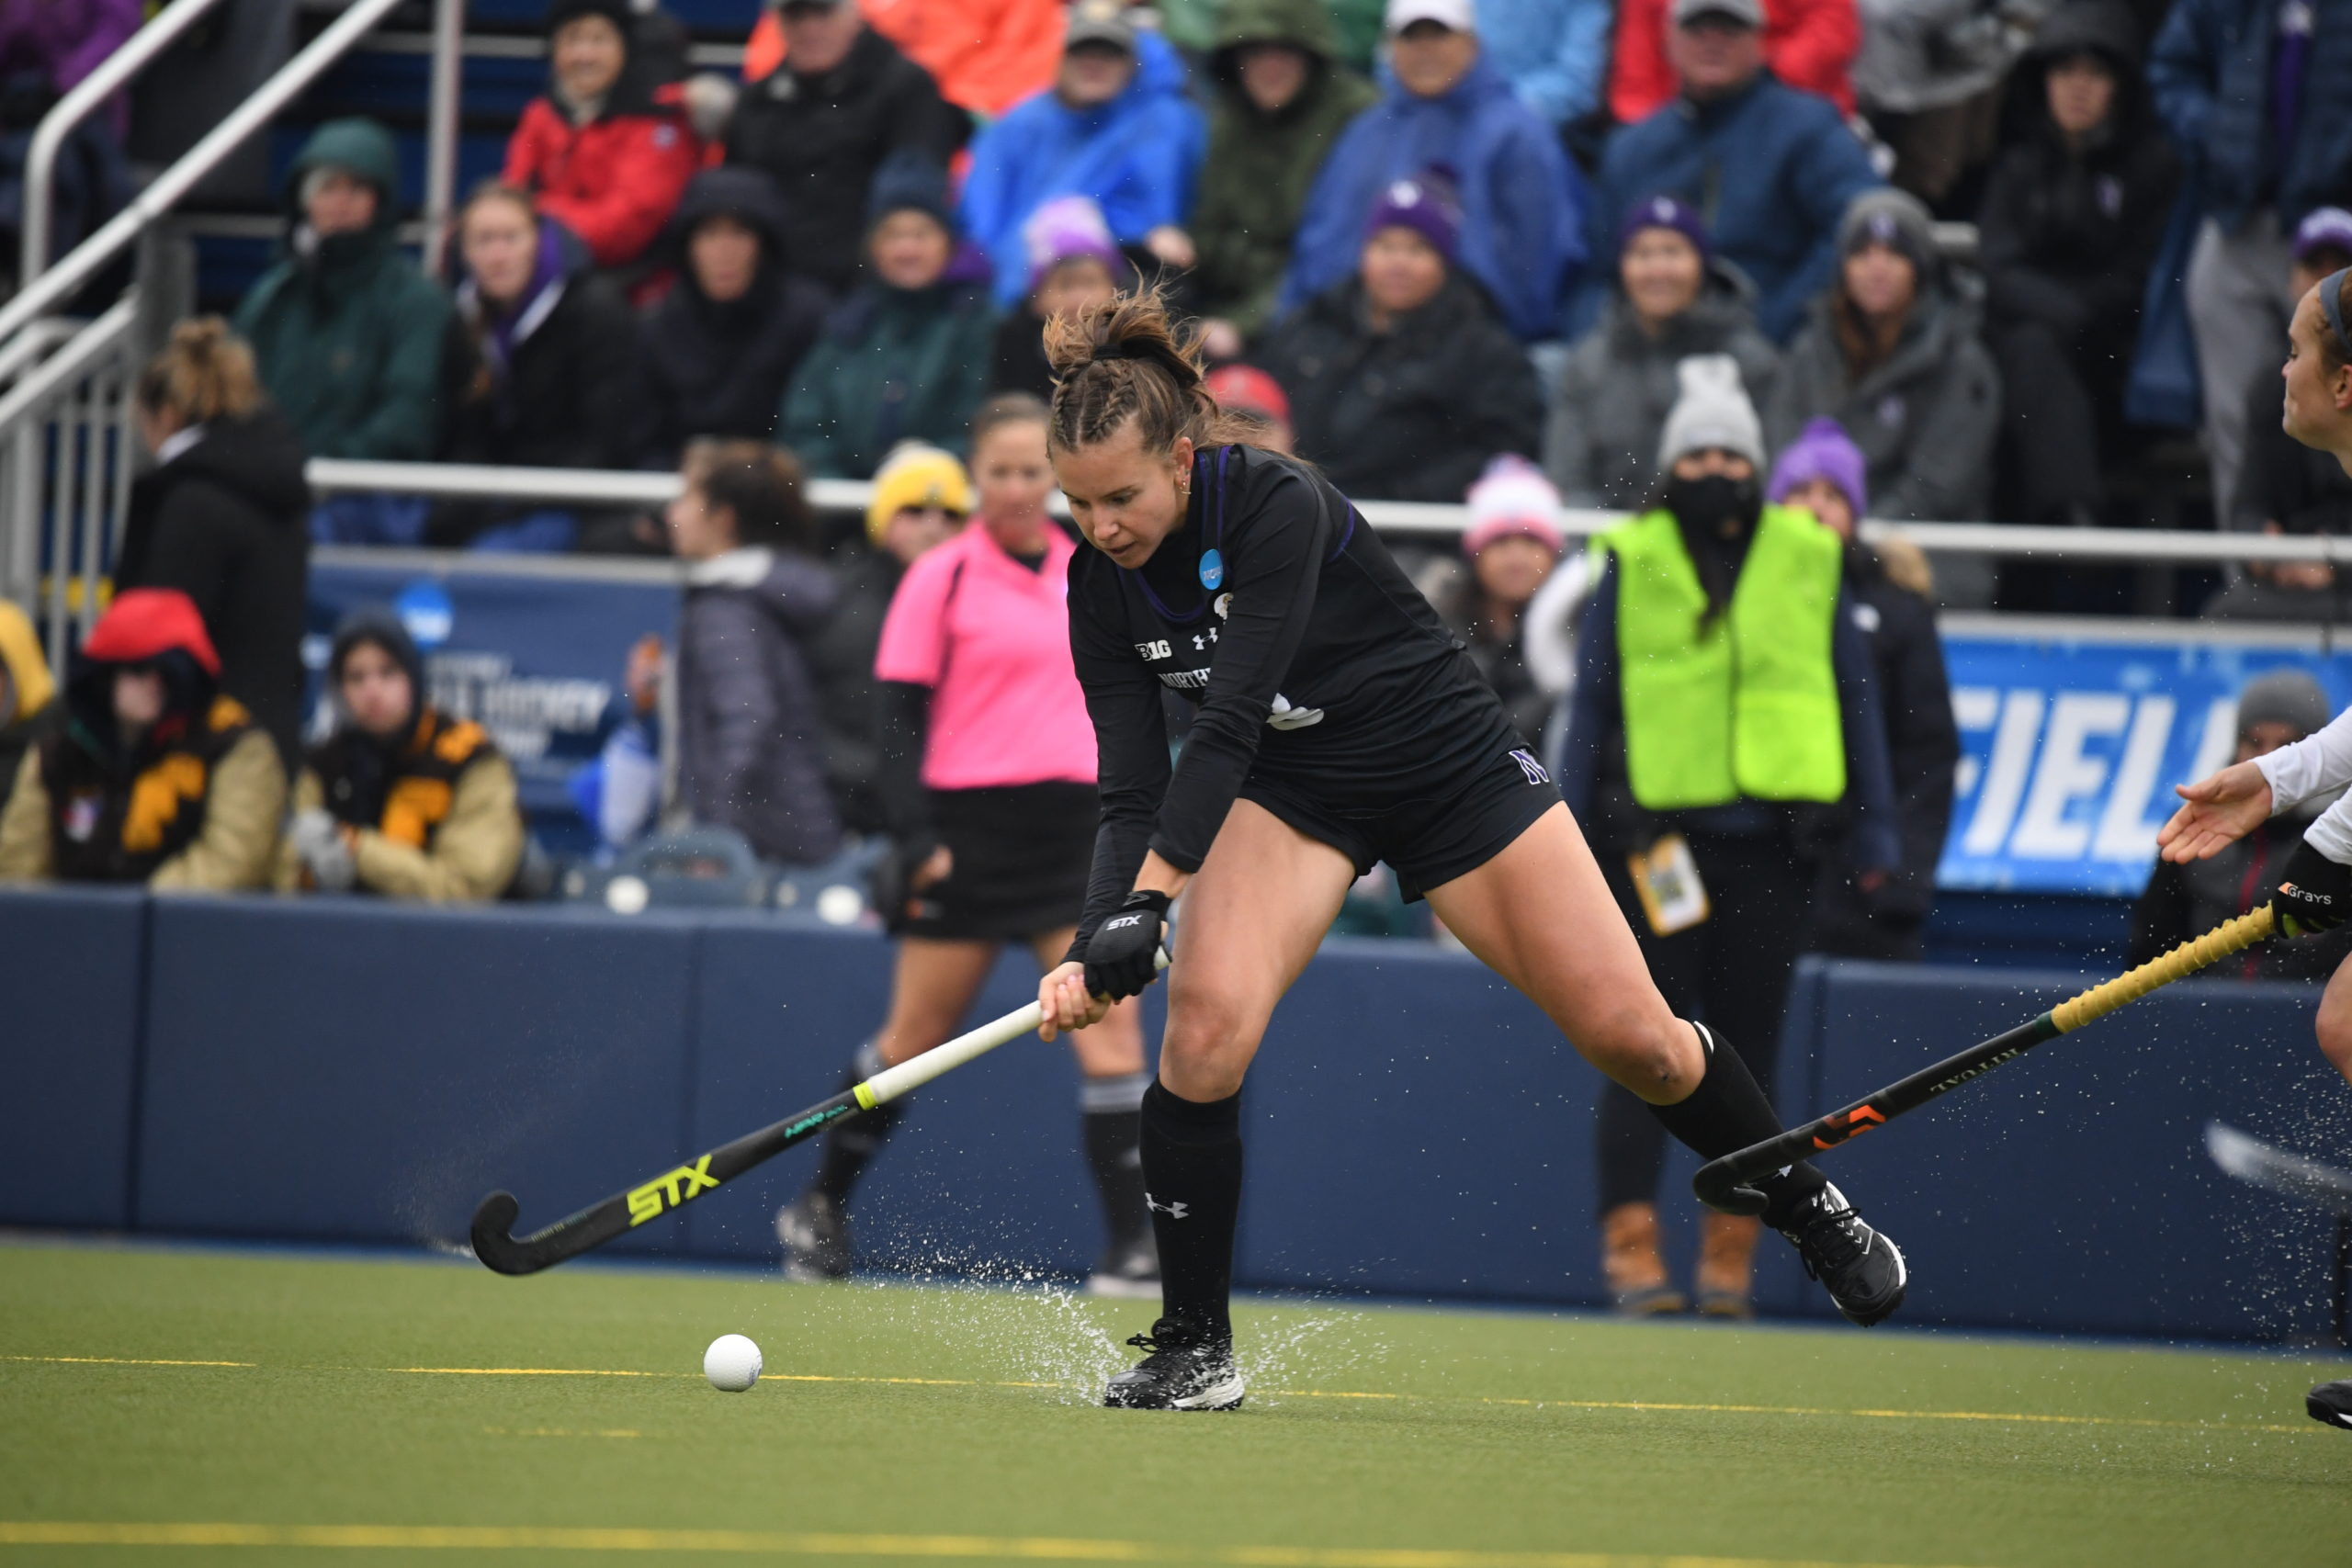 2021 NFHCA Division I All-American, Maddie Zimmer